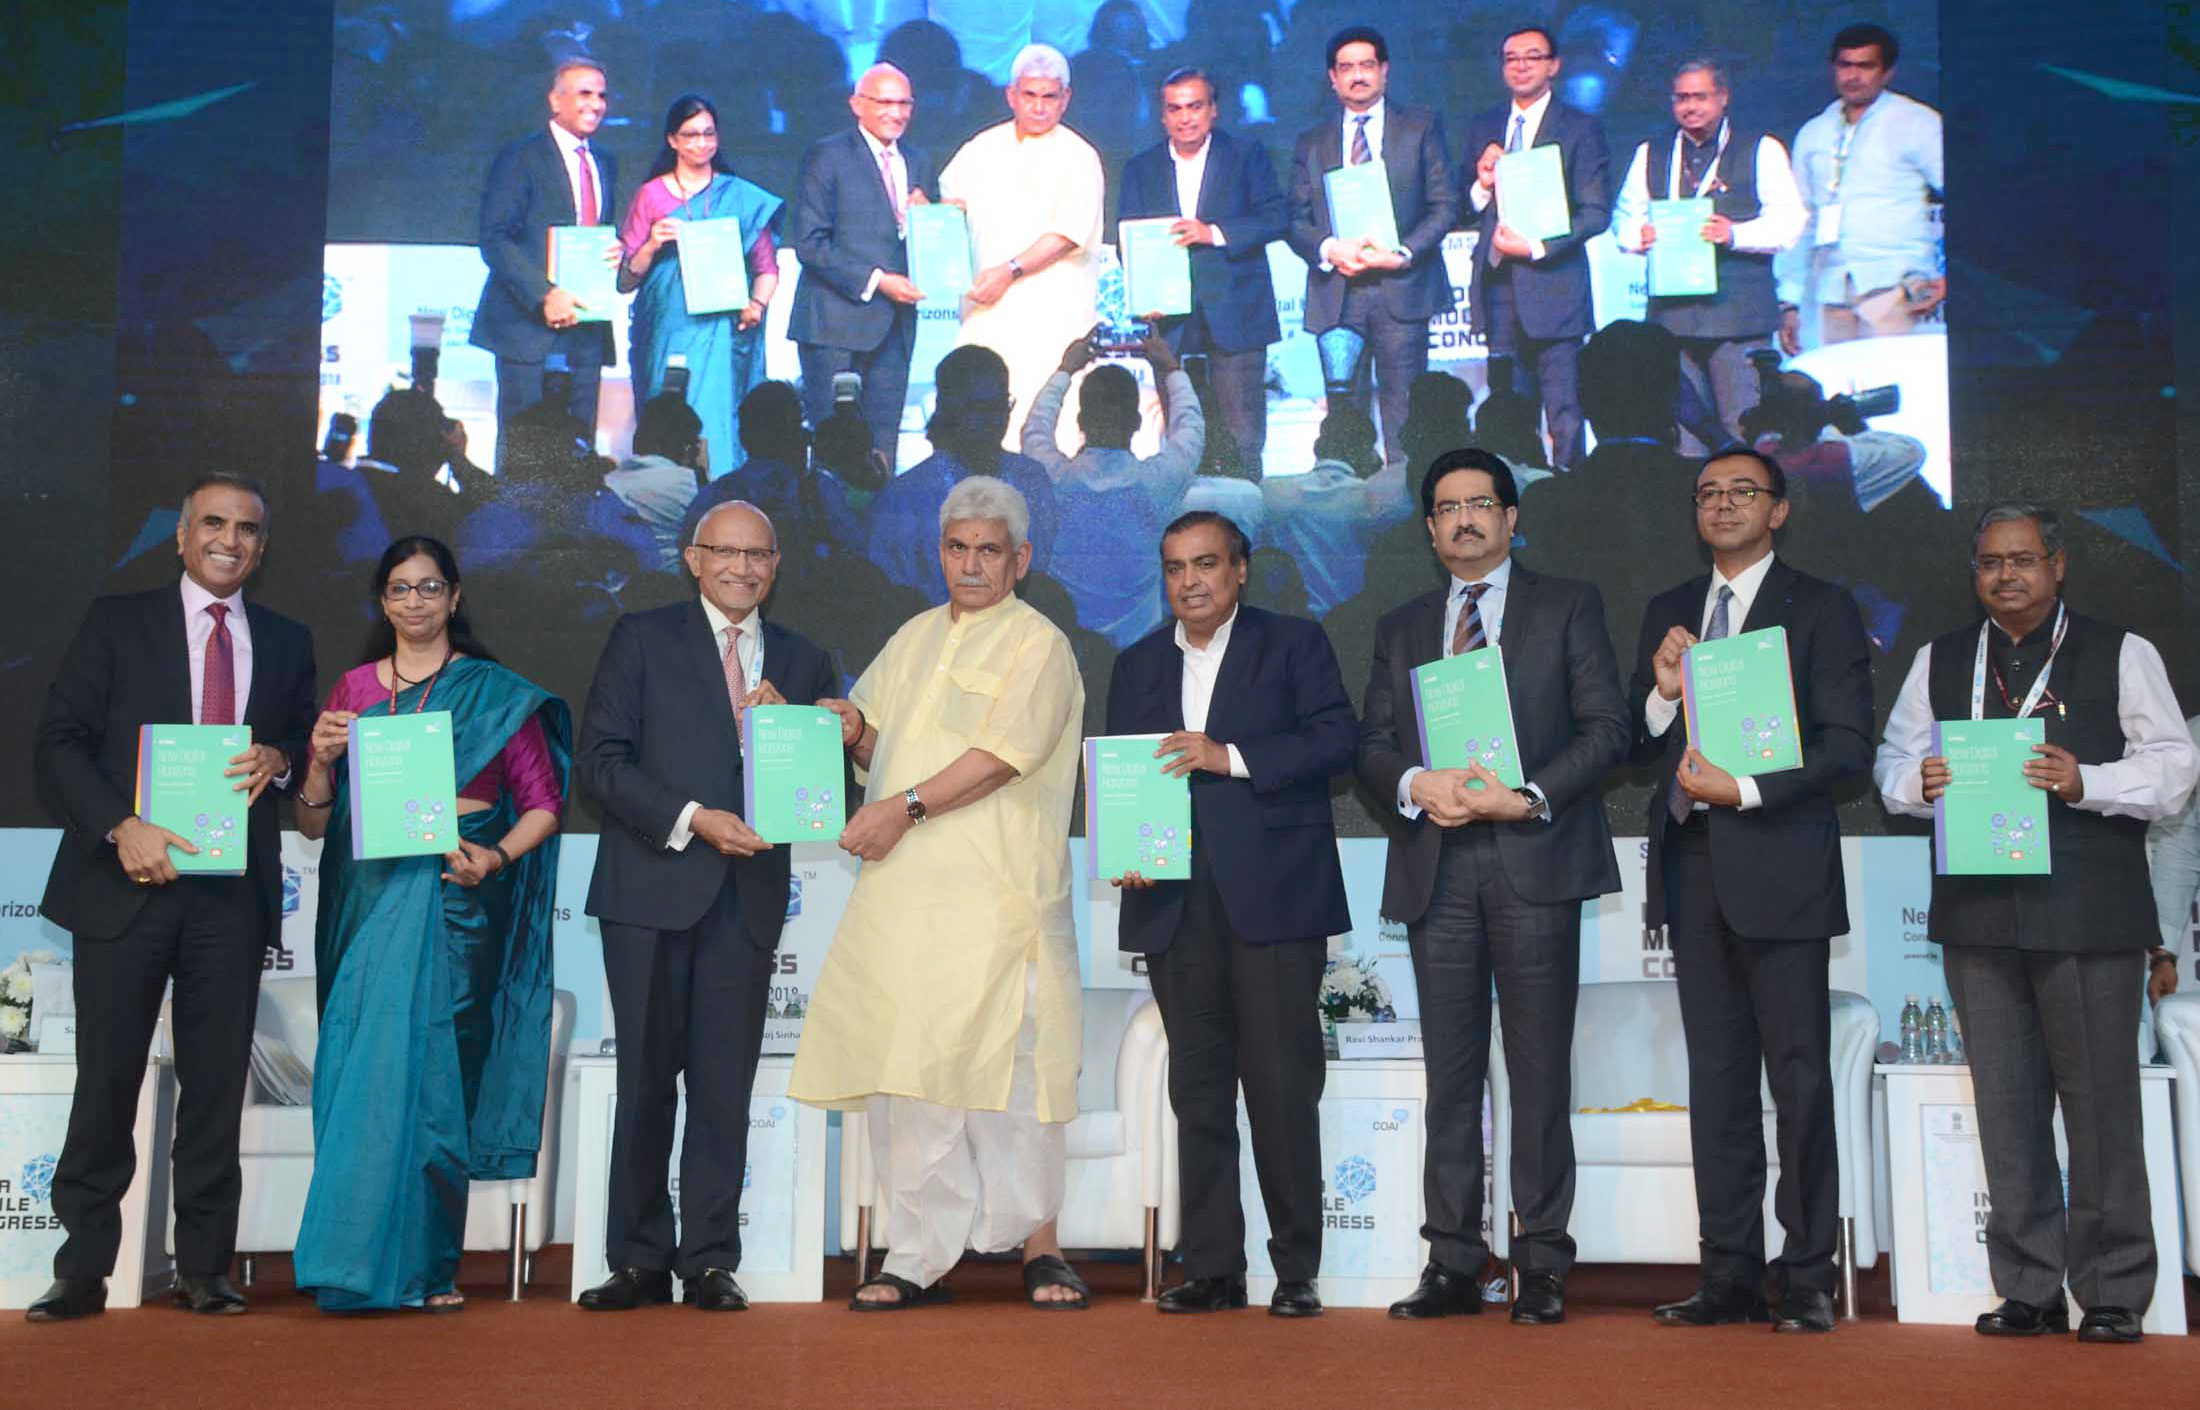 The Minister of State for Communications (I/C) and Railways, Shri Manoj Sinha releasing the publication, at the inauguration of the India Mobile Congress - 2018, in New Delhi on October 25, 2018. The Secretary, (Telecom), Ms. Aruna Sundararajan and other dignitaries are also seen.